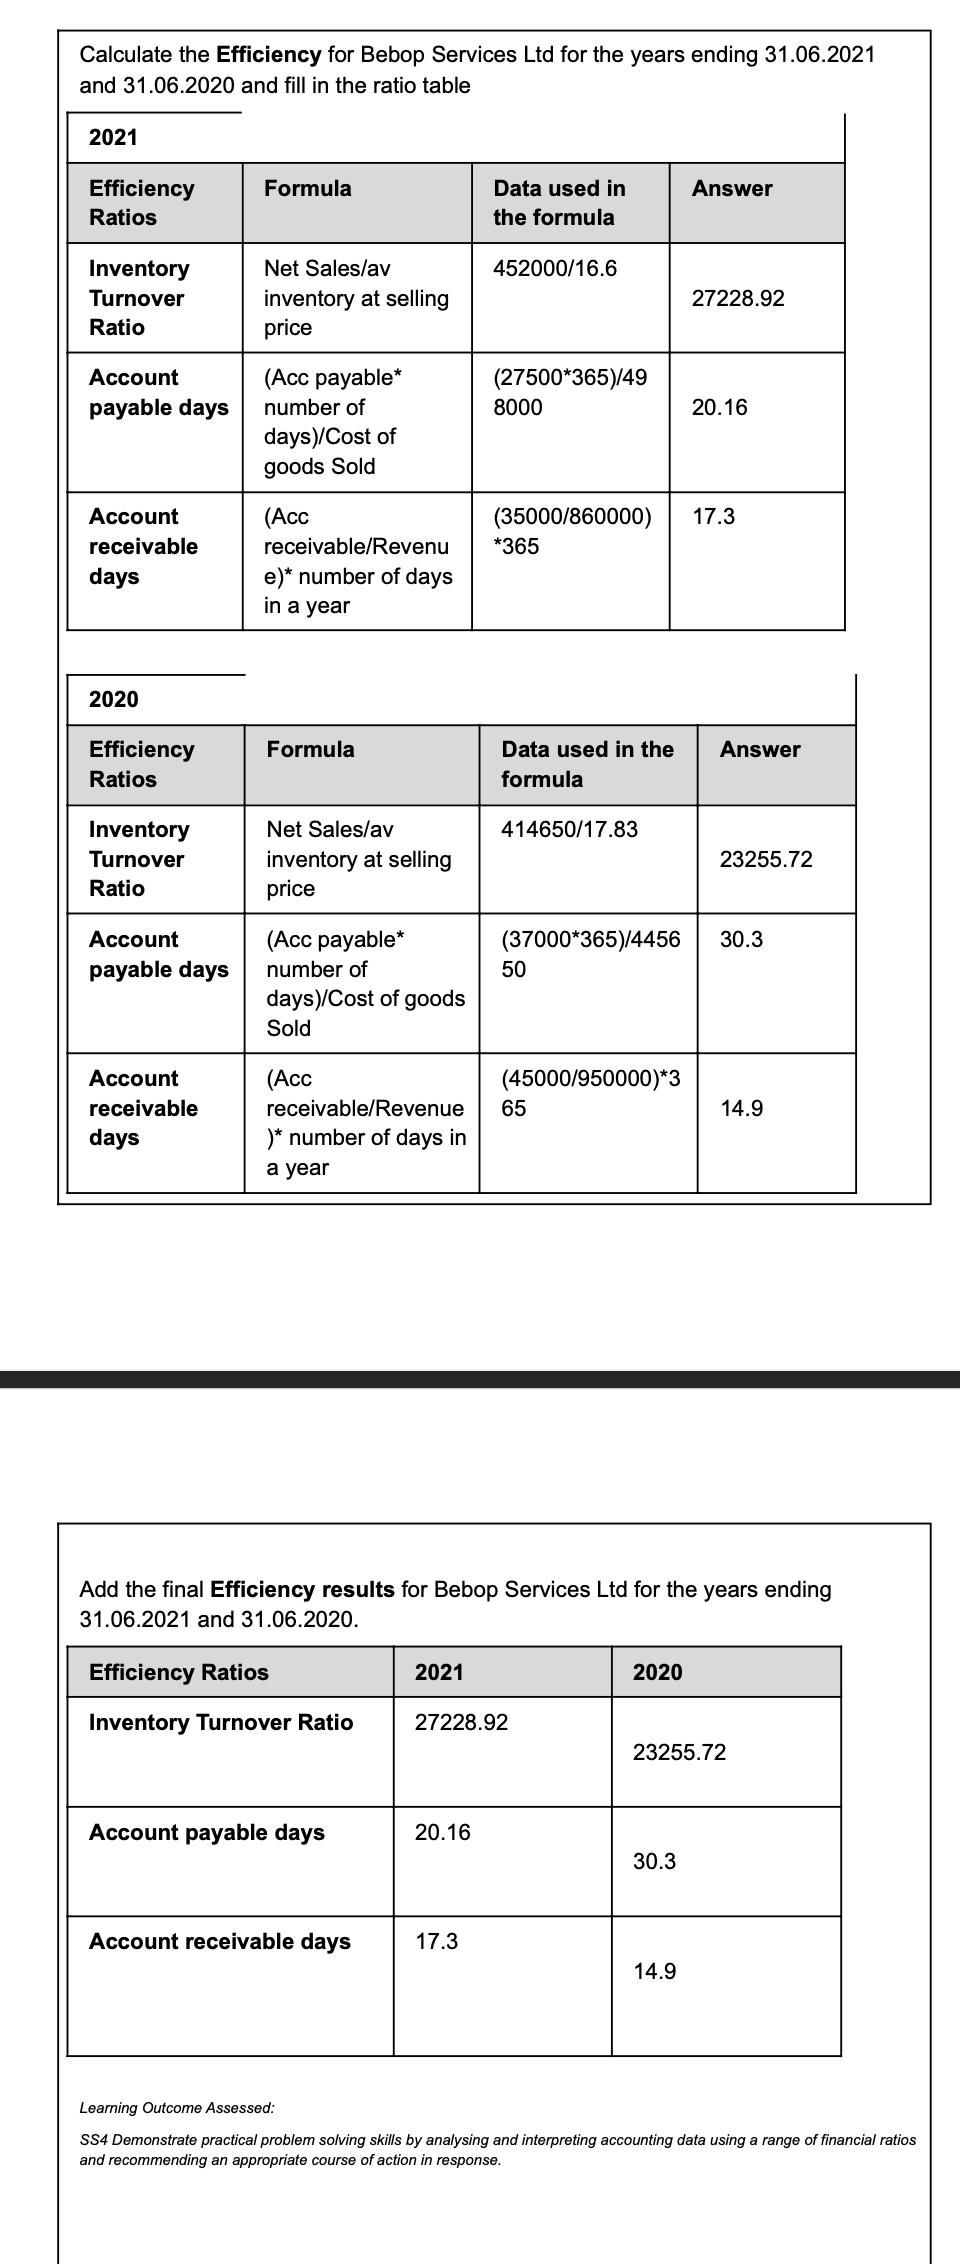 Calculate the Efficiency for Bebop Services Ltd for the years ending 31.06.2021 and 31.06.2020 and fill in the ratio table 20